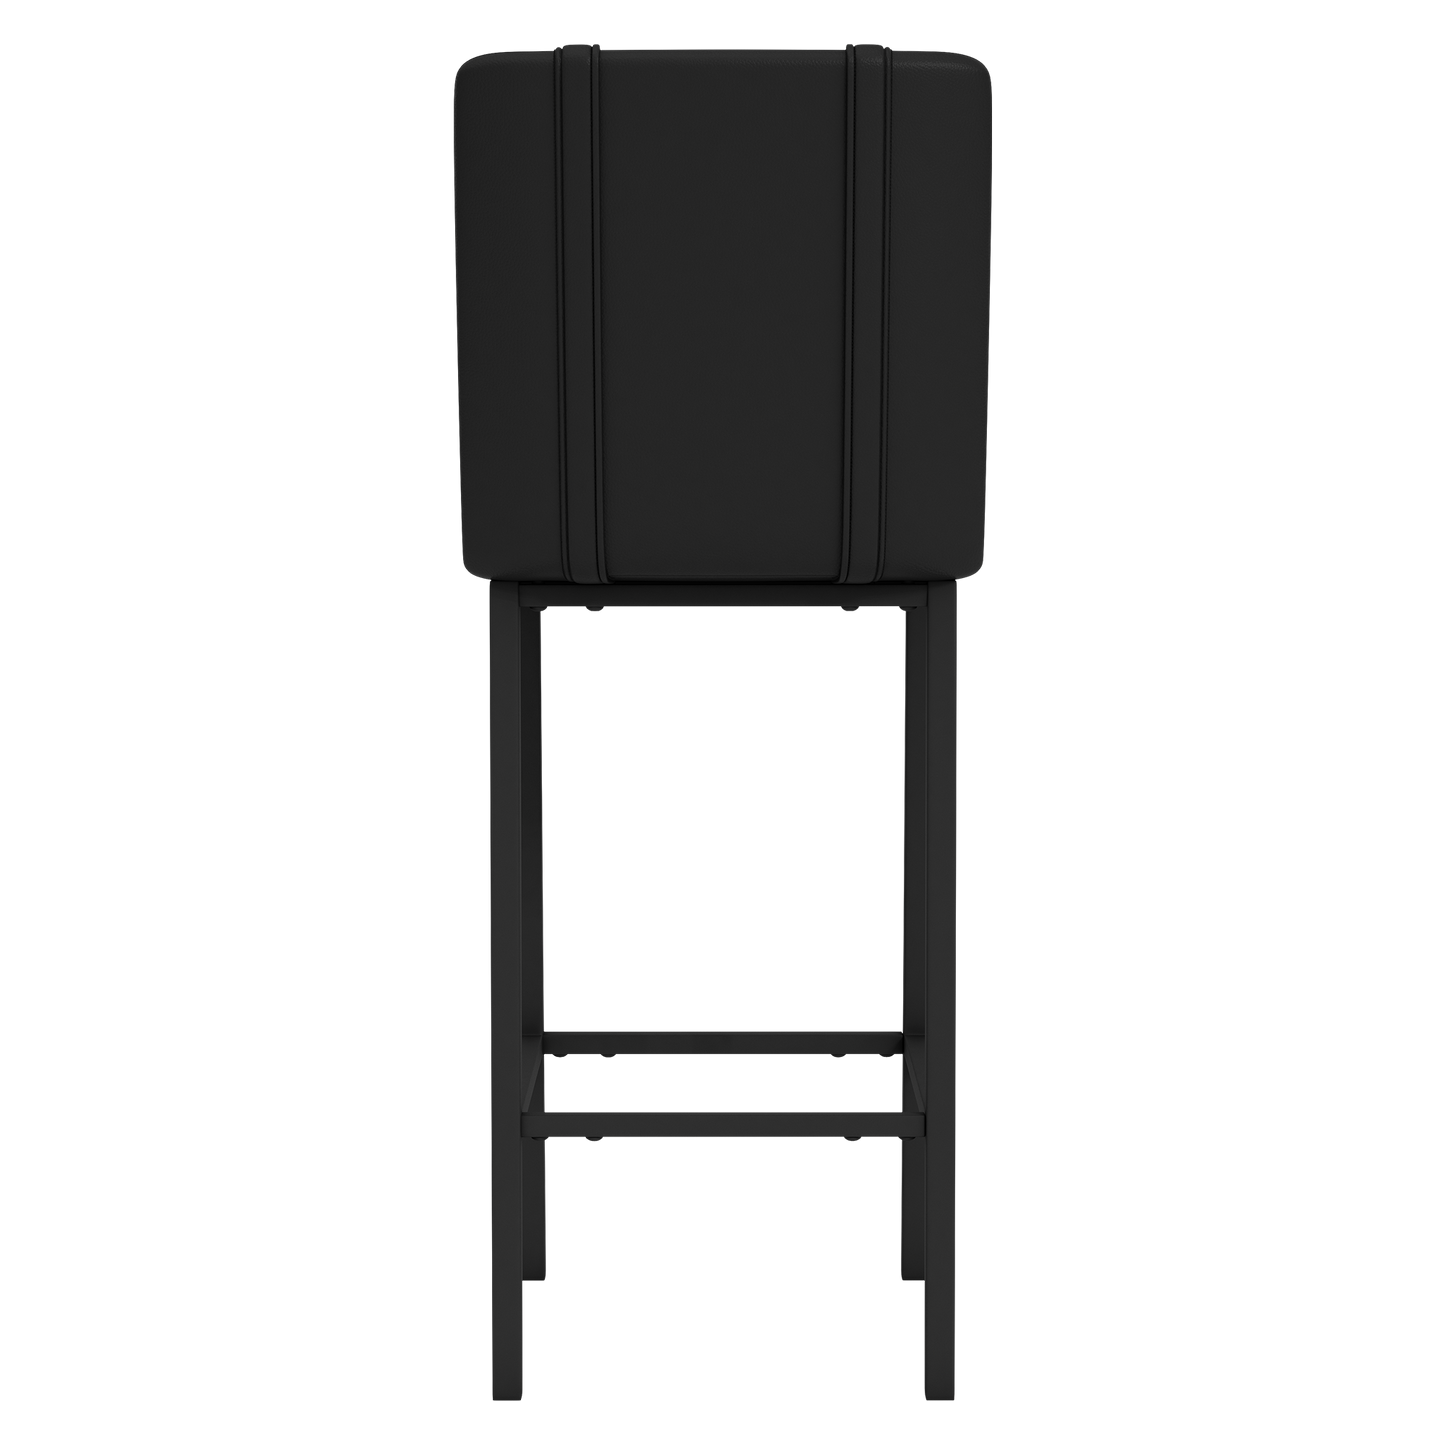 Bar Stool 500 with Charlotte FC Crown Logo Set of 2